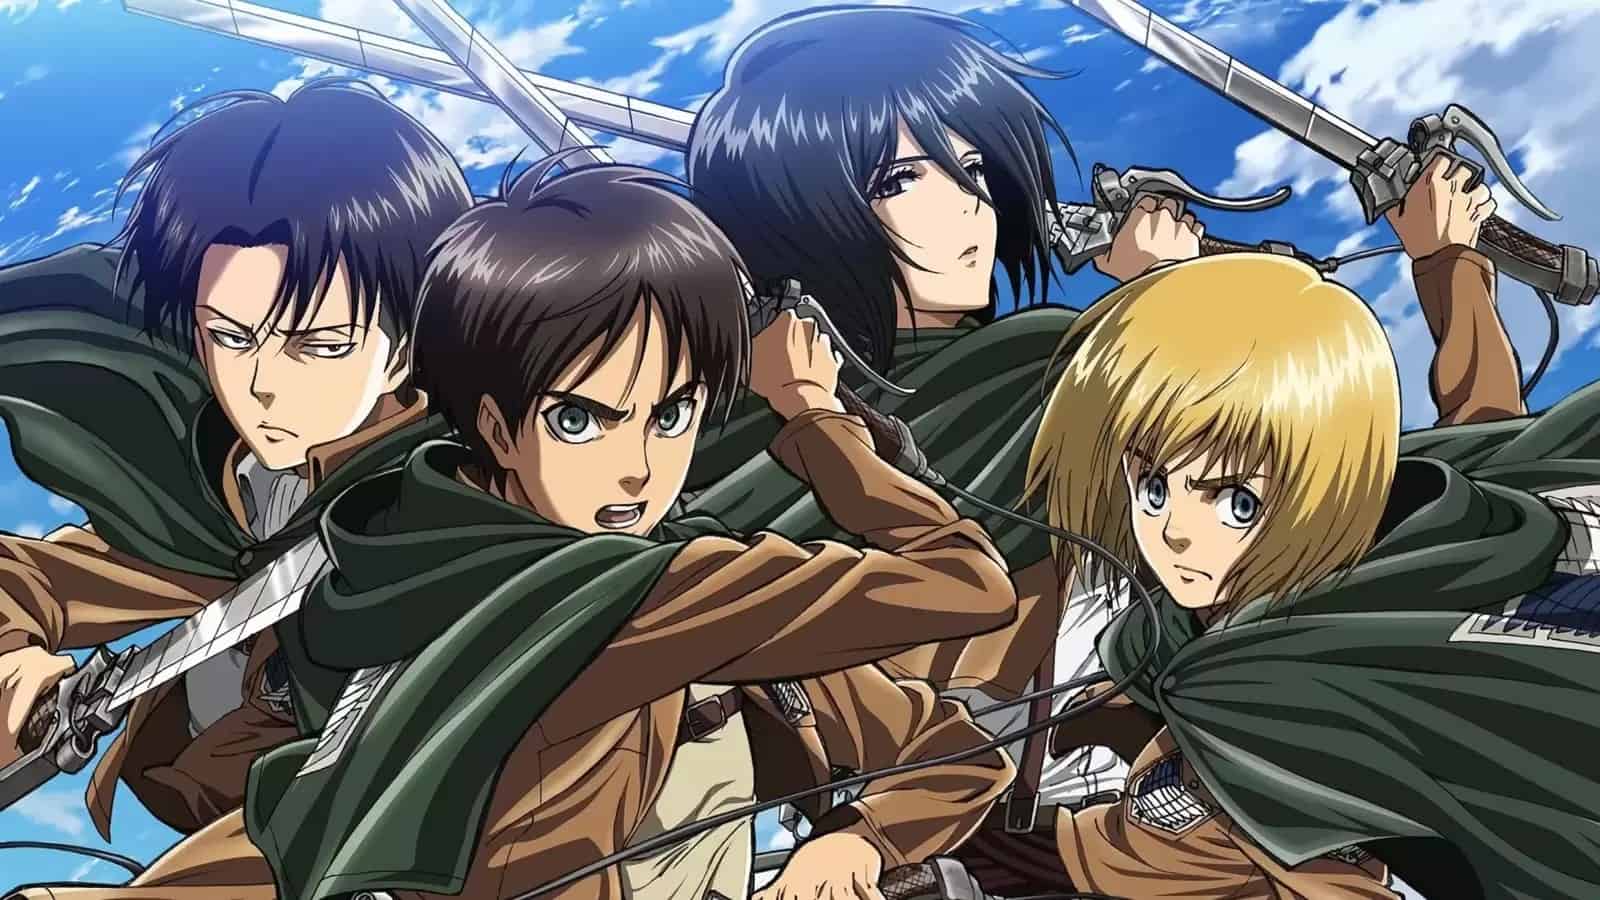 Attack on Titan: Where does the anime end in the manga